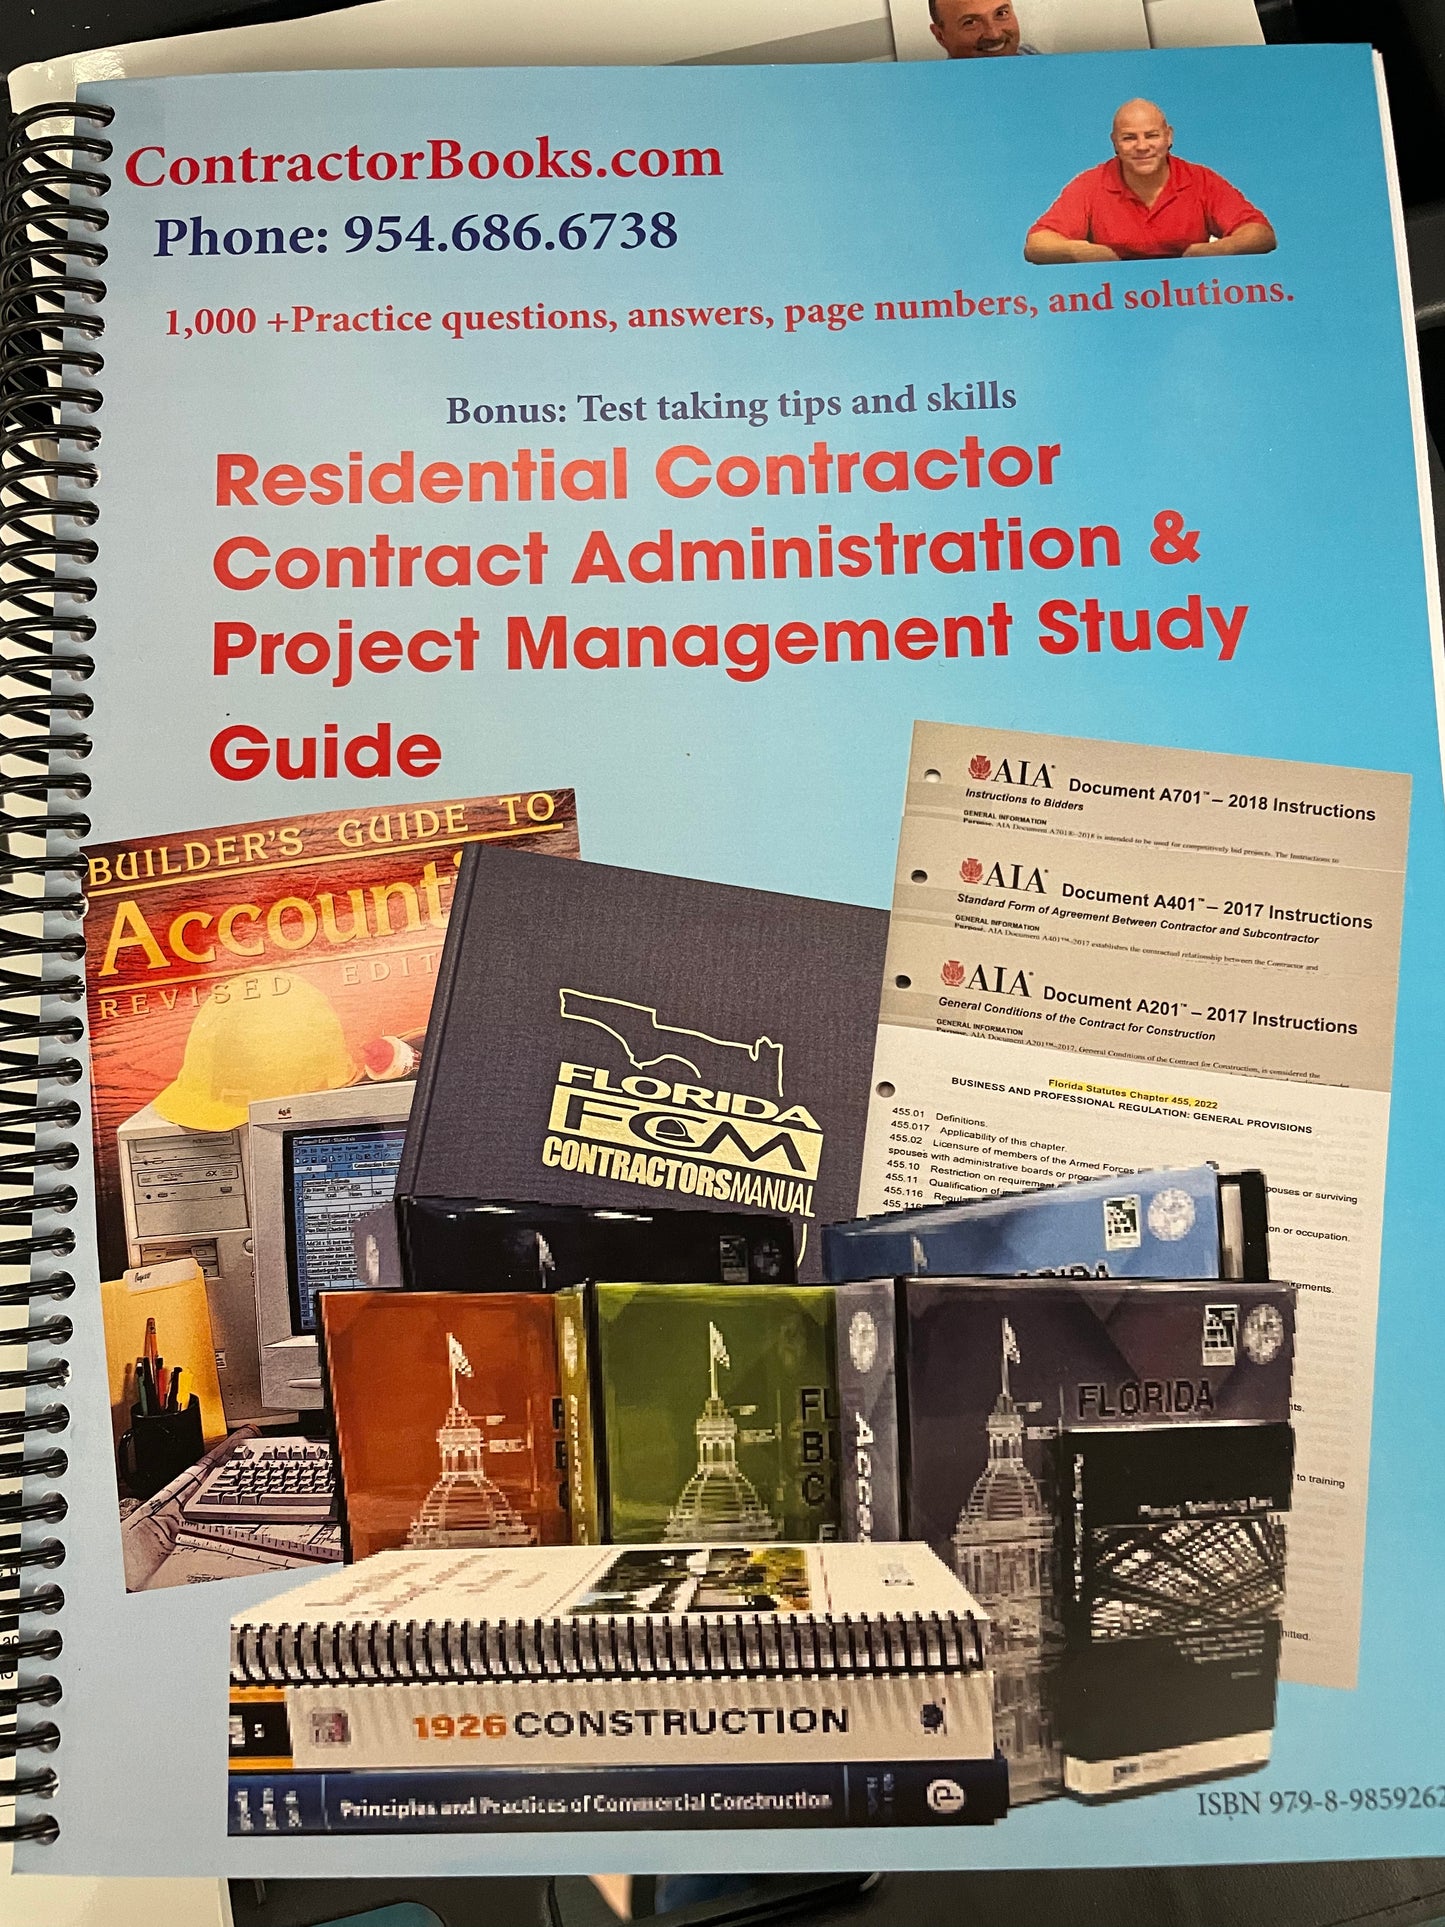 Residential Contractor Contract Administration & Project Management Study Guide